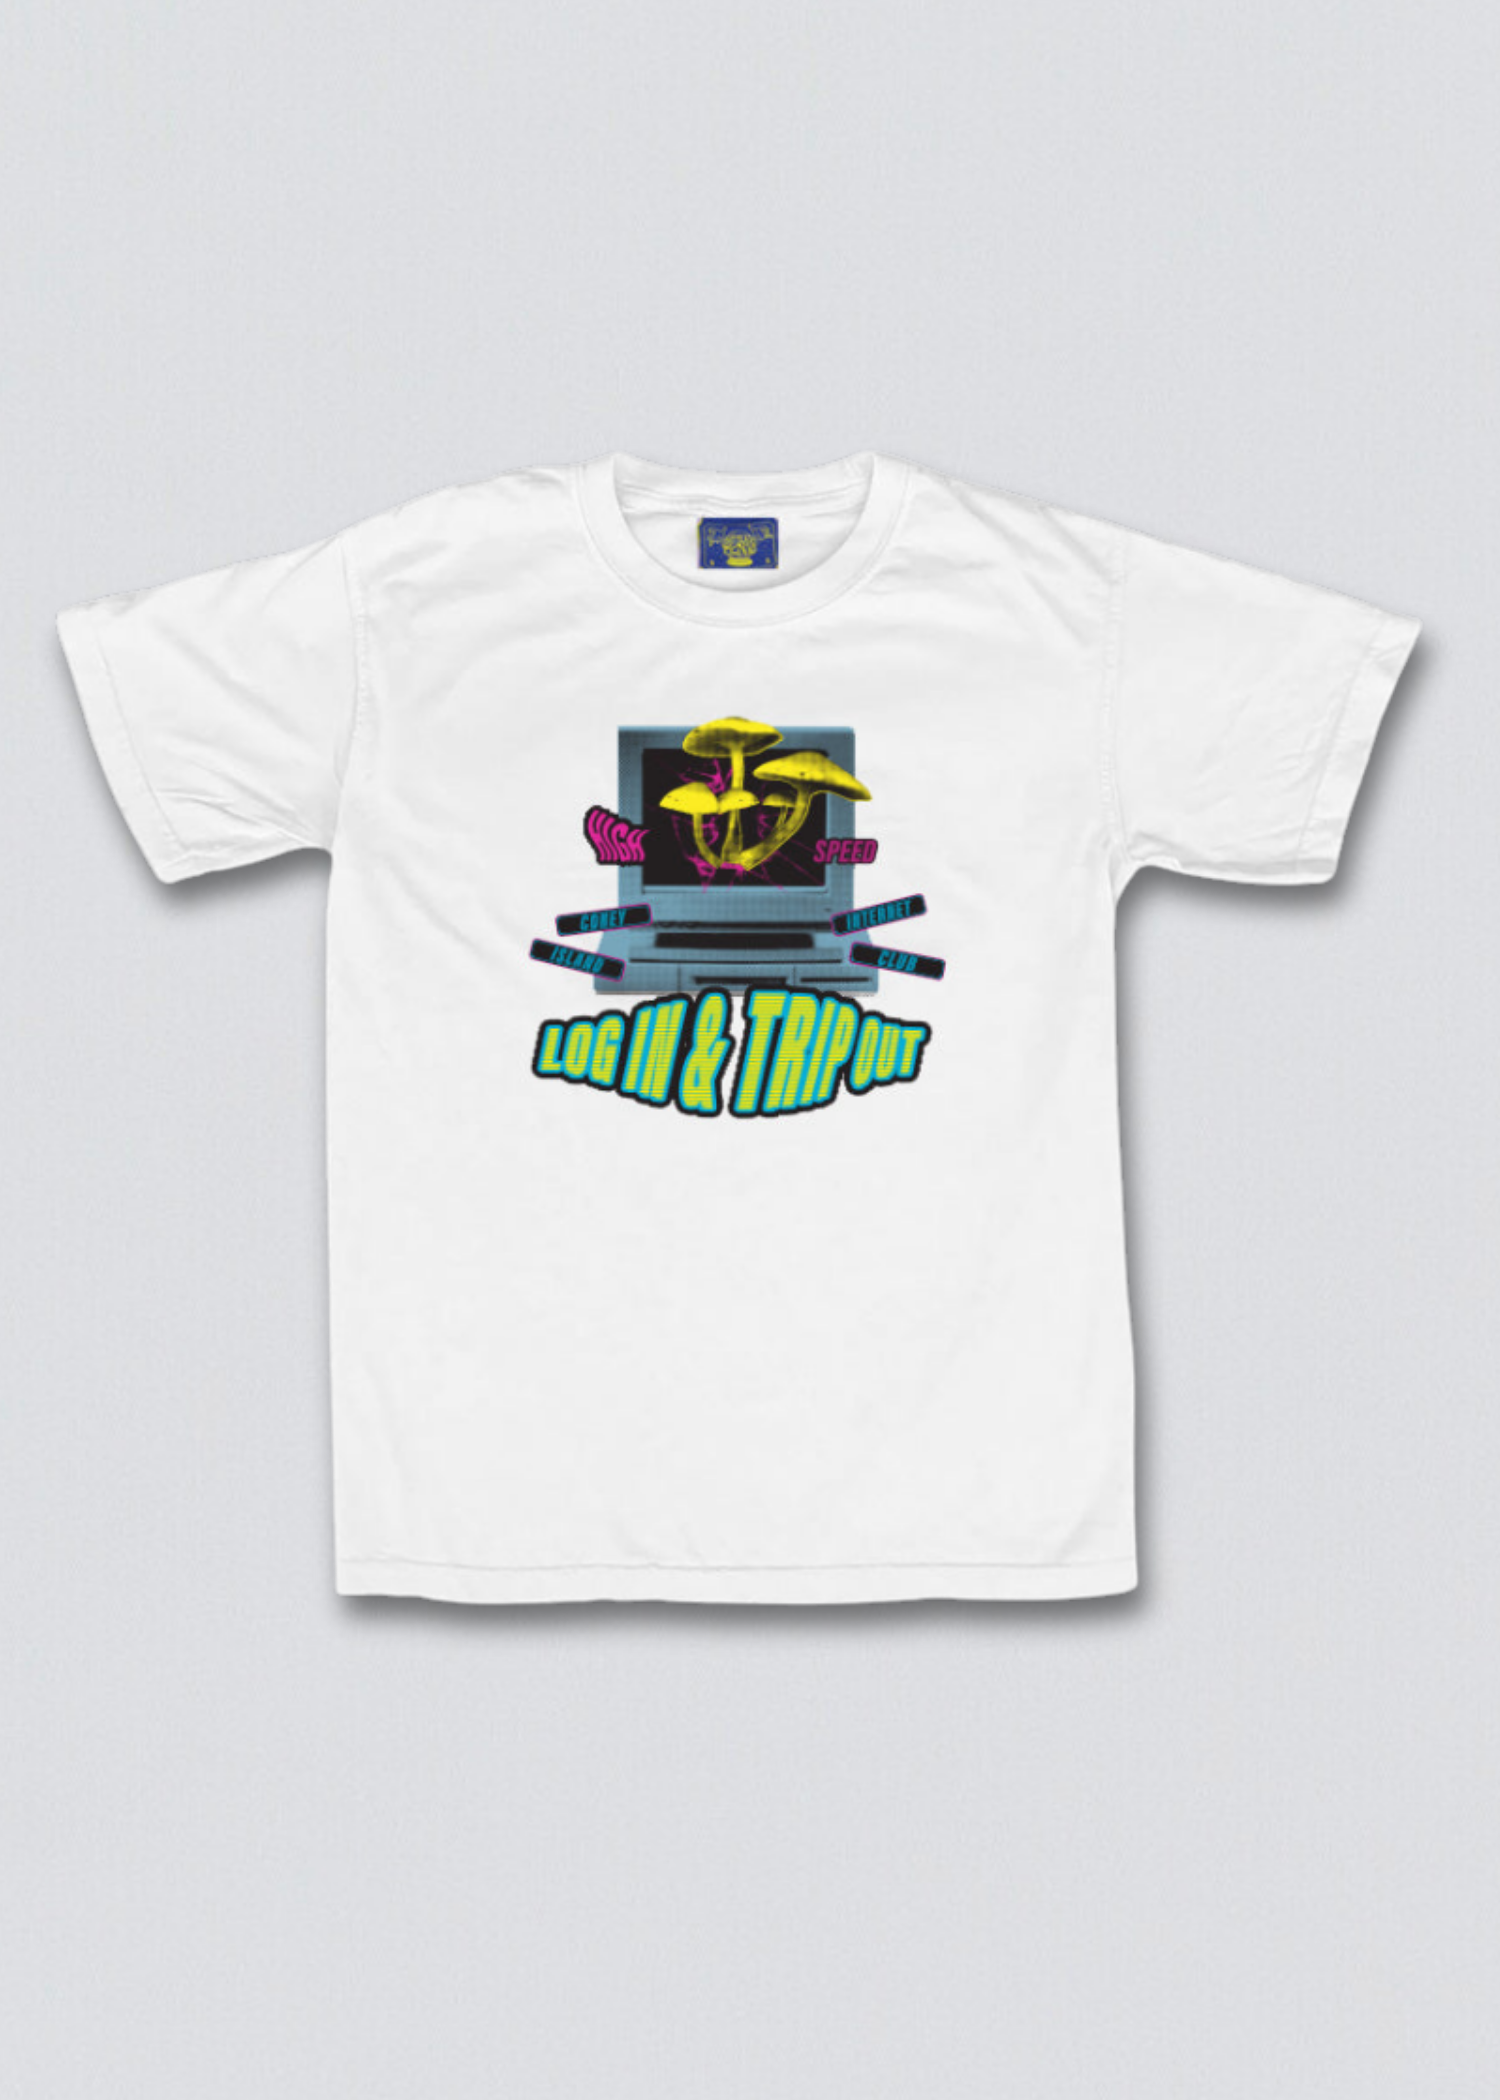 Log In & Trip Out Graphic Short Sleeve Tee